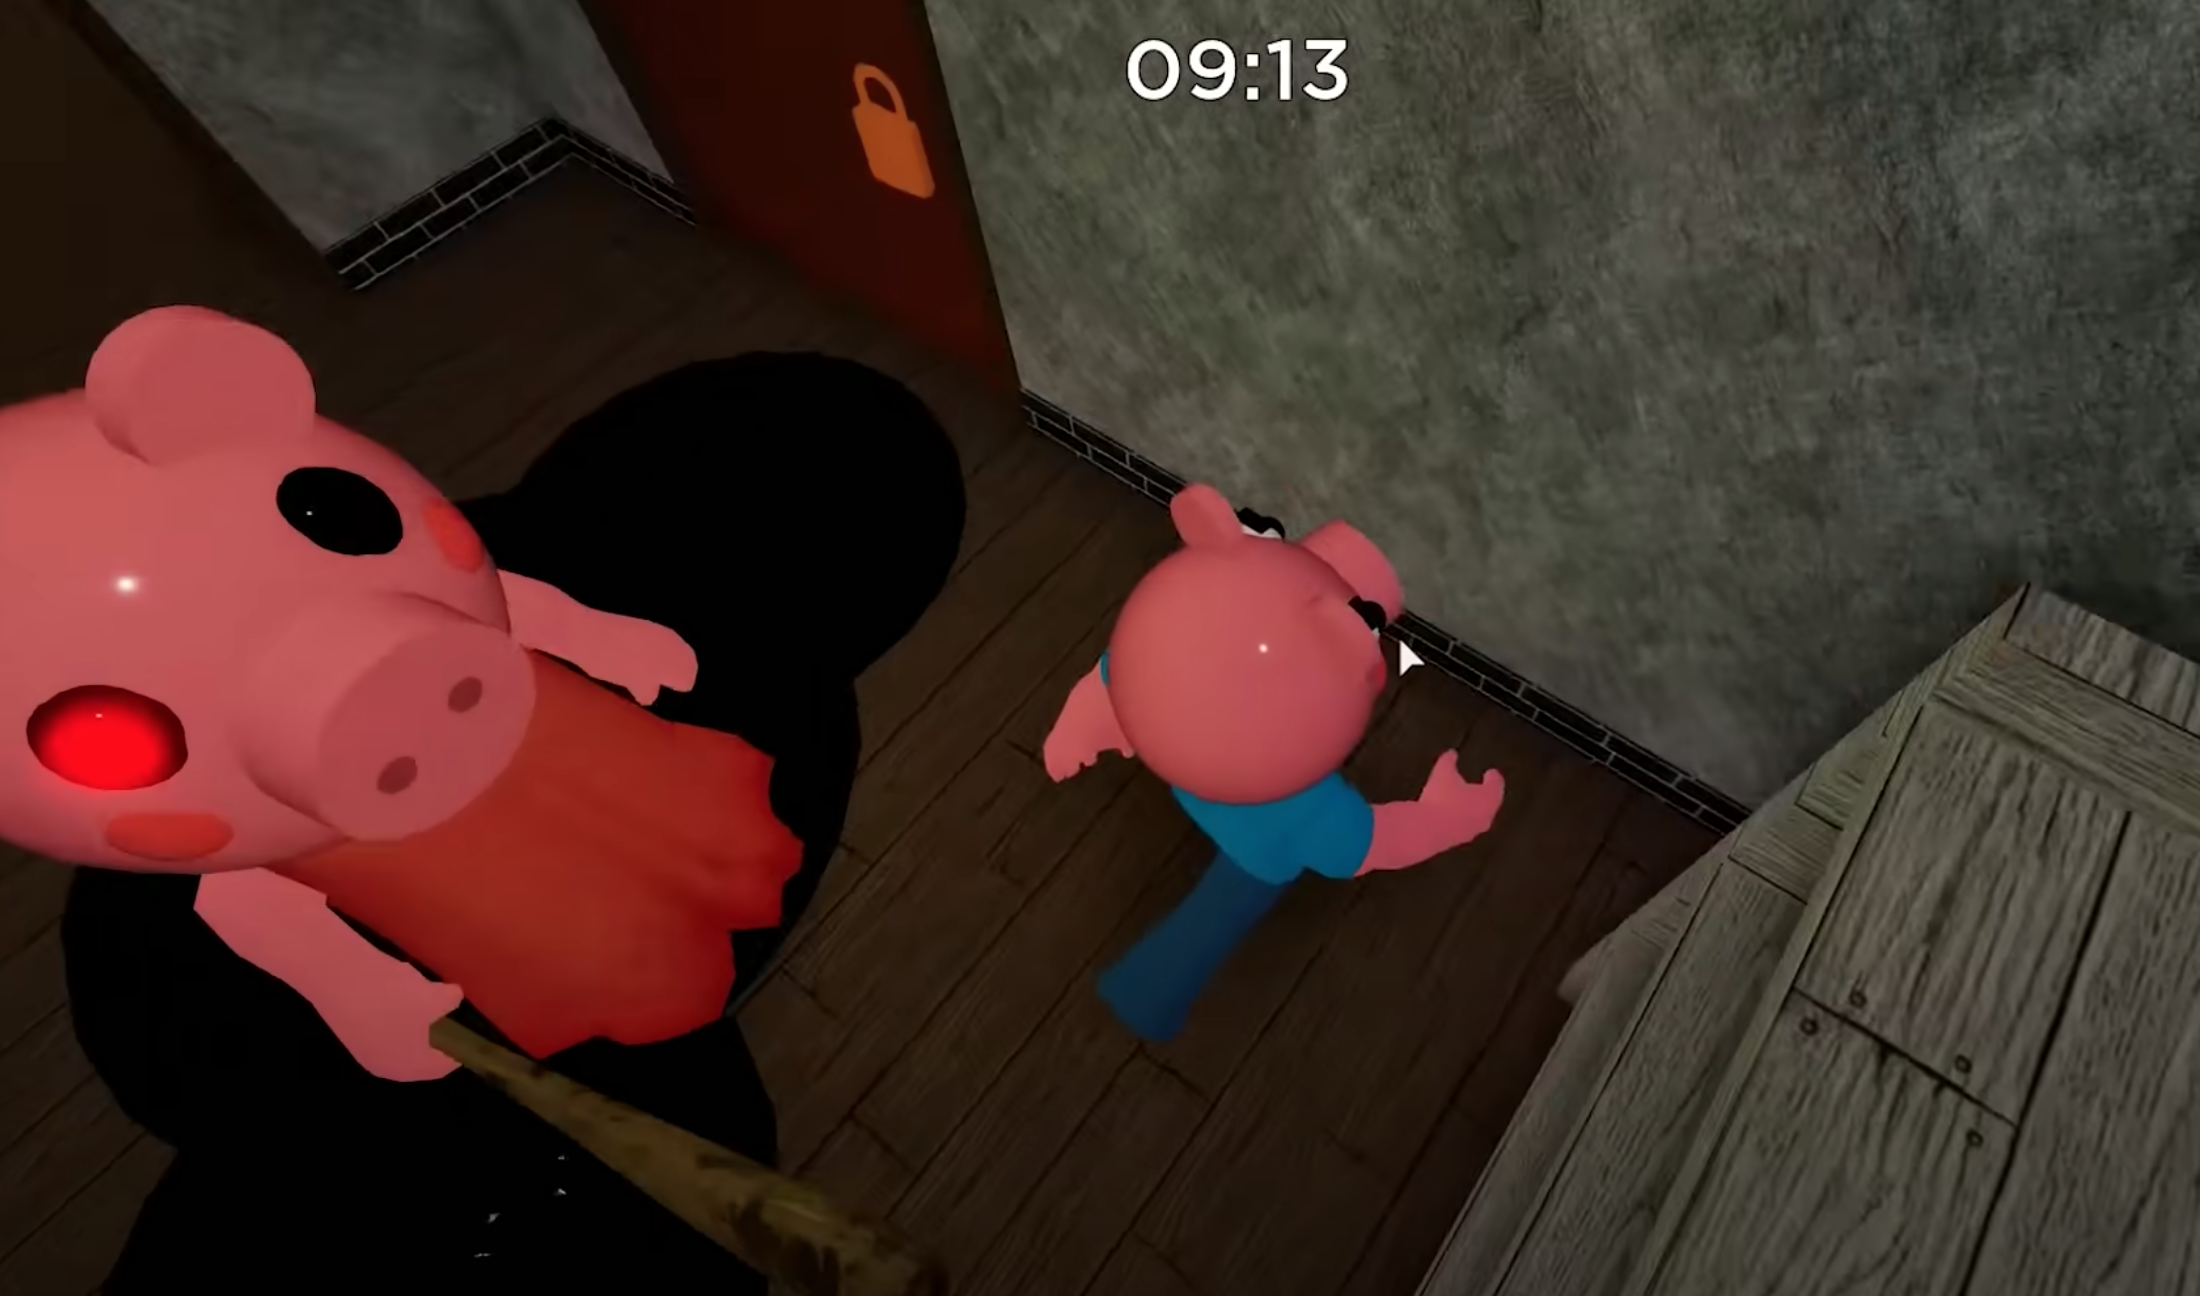 Roblox Piggy But on PS4! (LIVE!) 